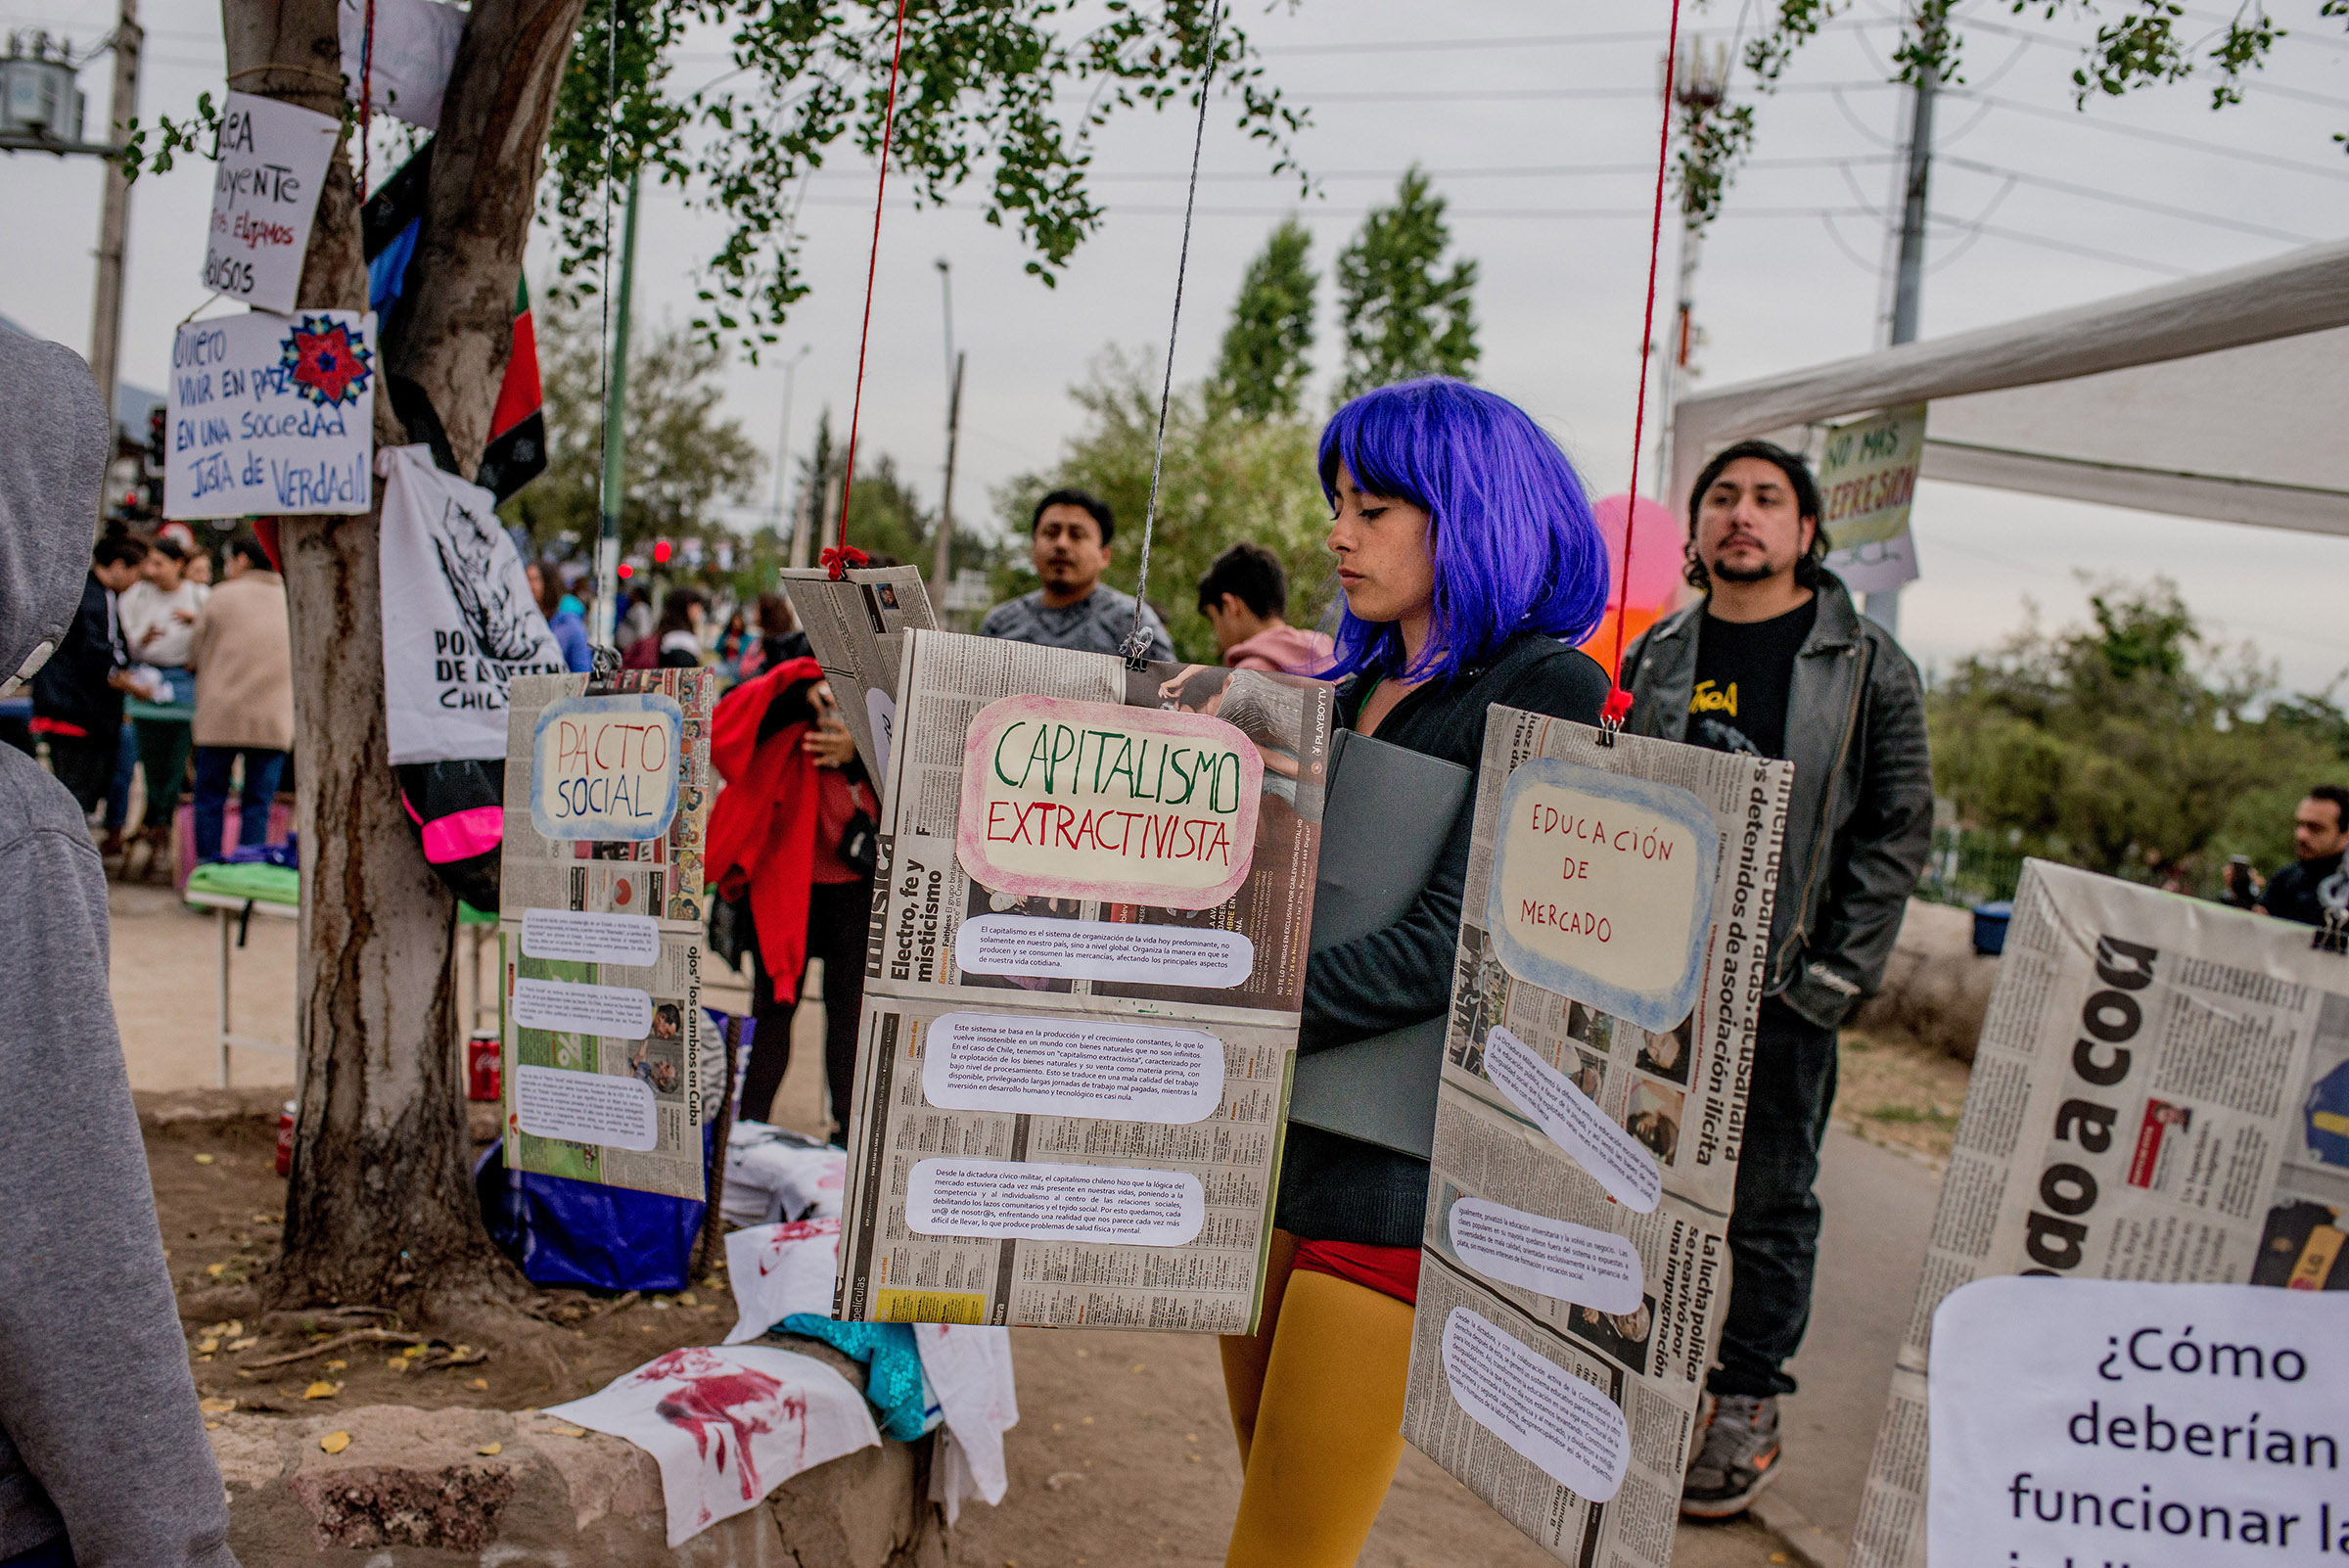 A gathering in Peñalolén, a neighborhood of Santiago, focuses on issues like education, economy and the Constitution, in Chile, on Oct. 27, 2019. (Tomas Munita—The New York Times/Redux)